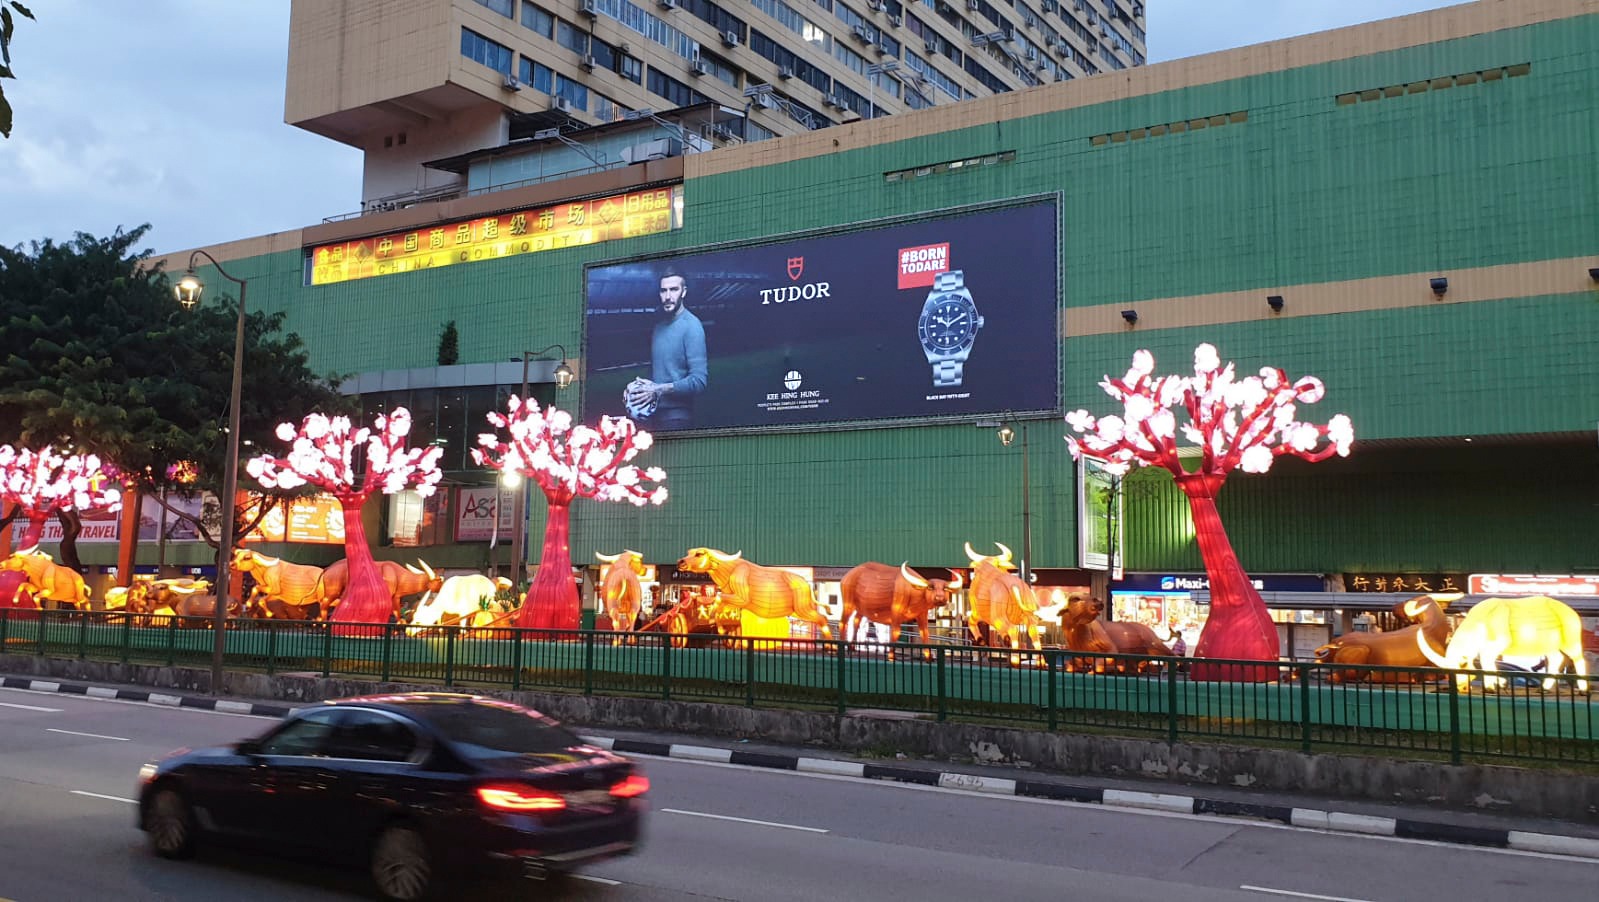 TPM outdoor advertising for David Beckham and Tudor